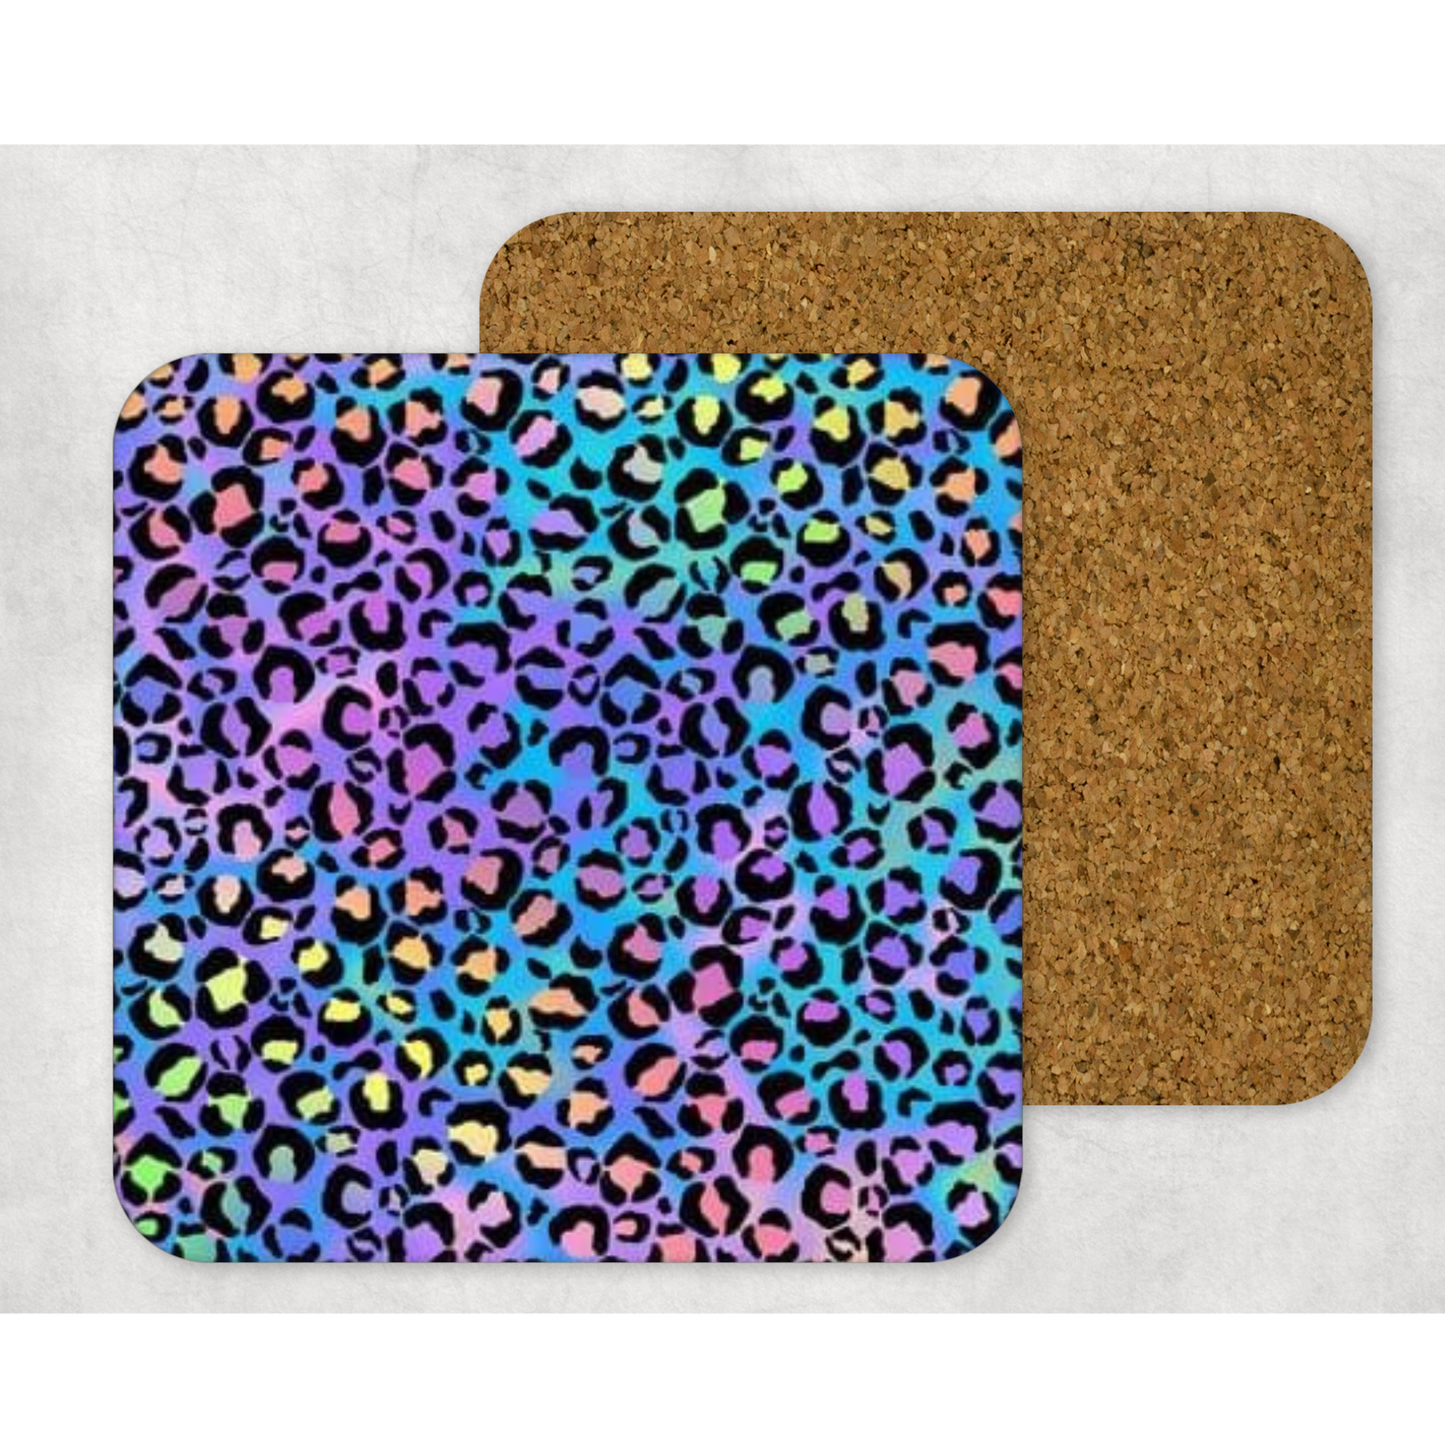 Beautifully Printed Colourful Animal Print Wooden Coasters for Stylish Home Décor